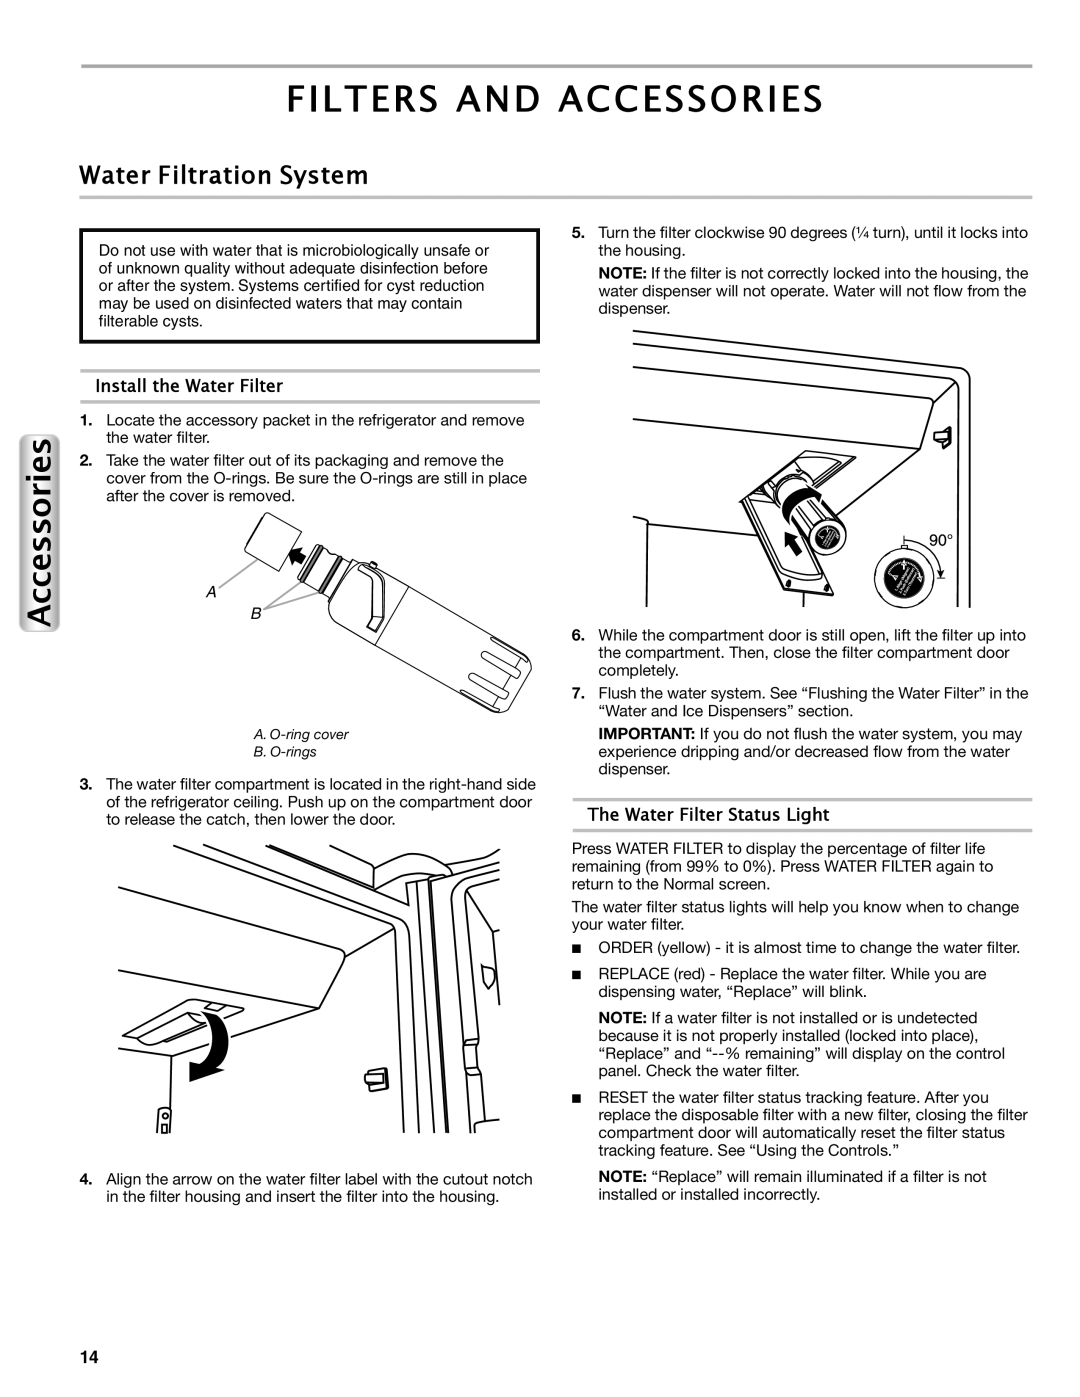 Maytag W10558104A manual Filters And Accessories, Water Filtration System, Install the Water Filter 